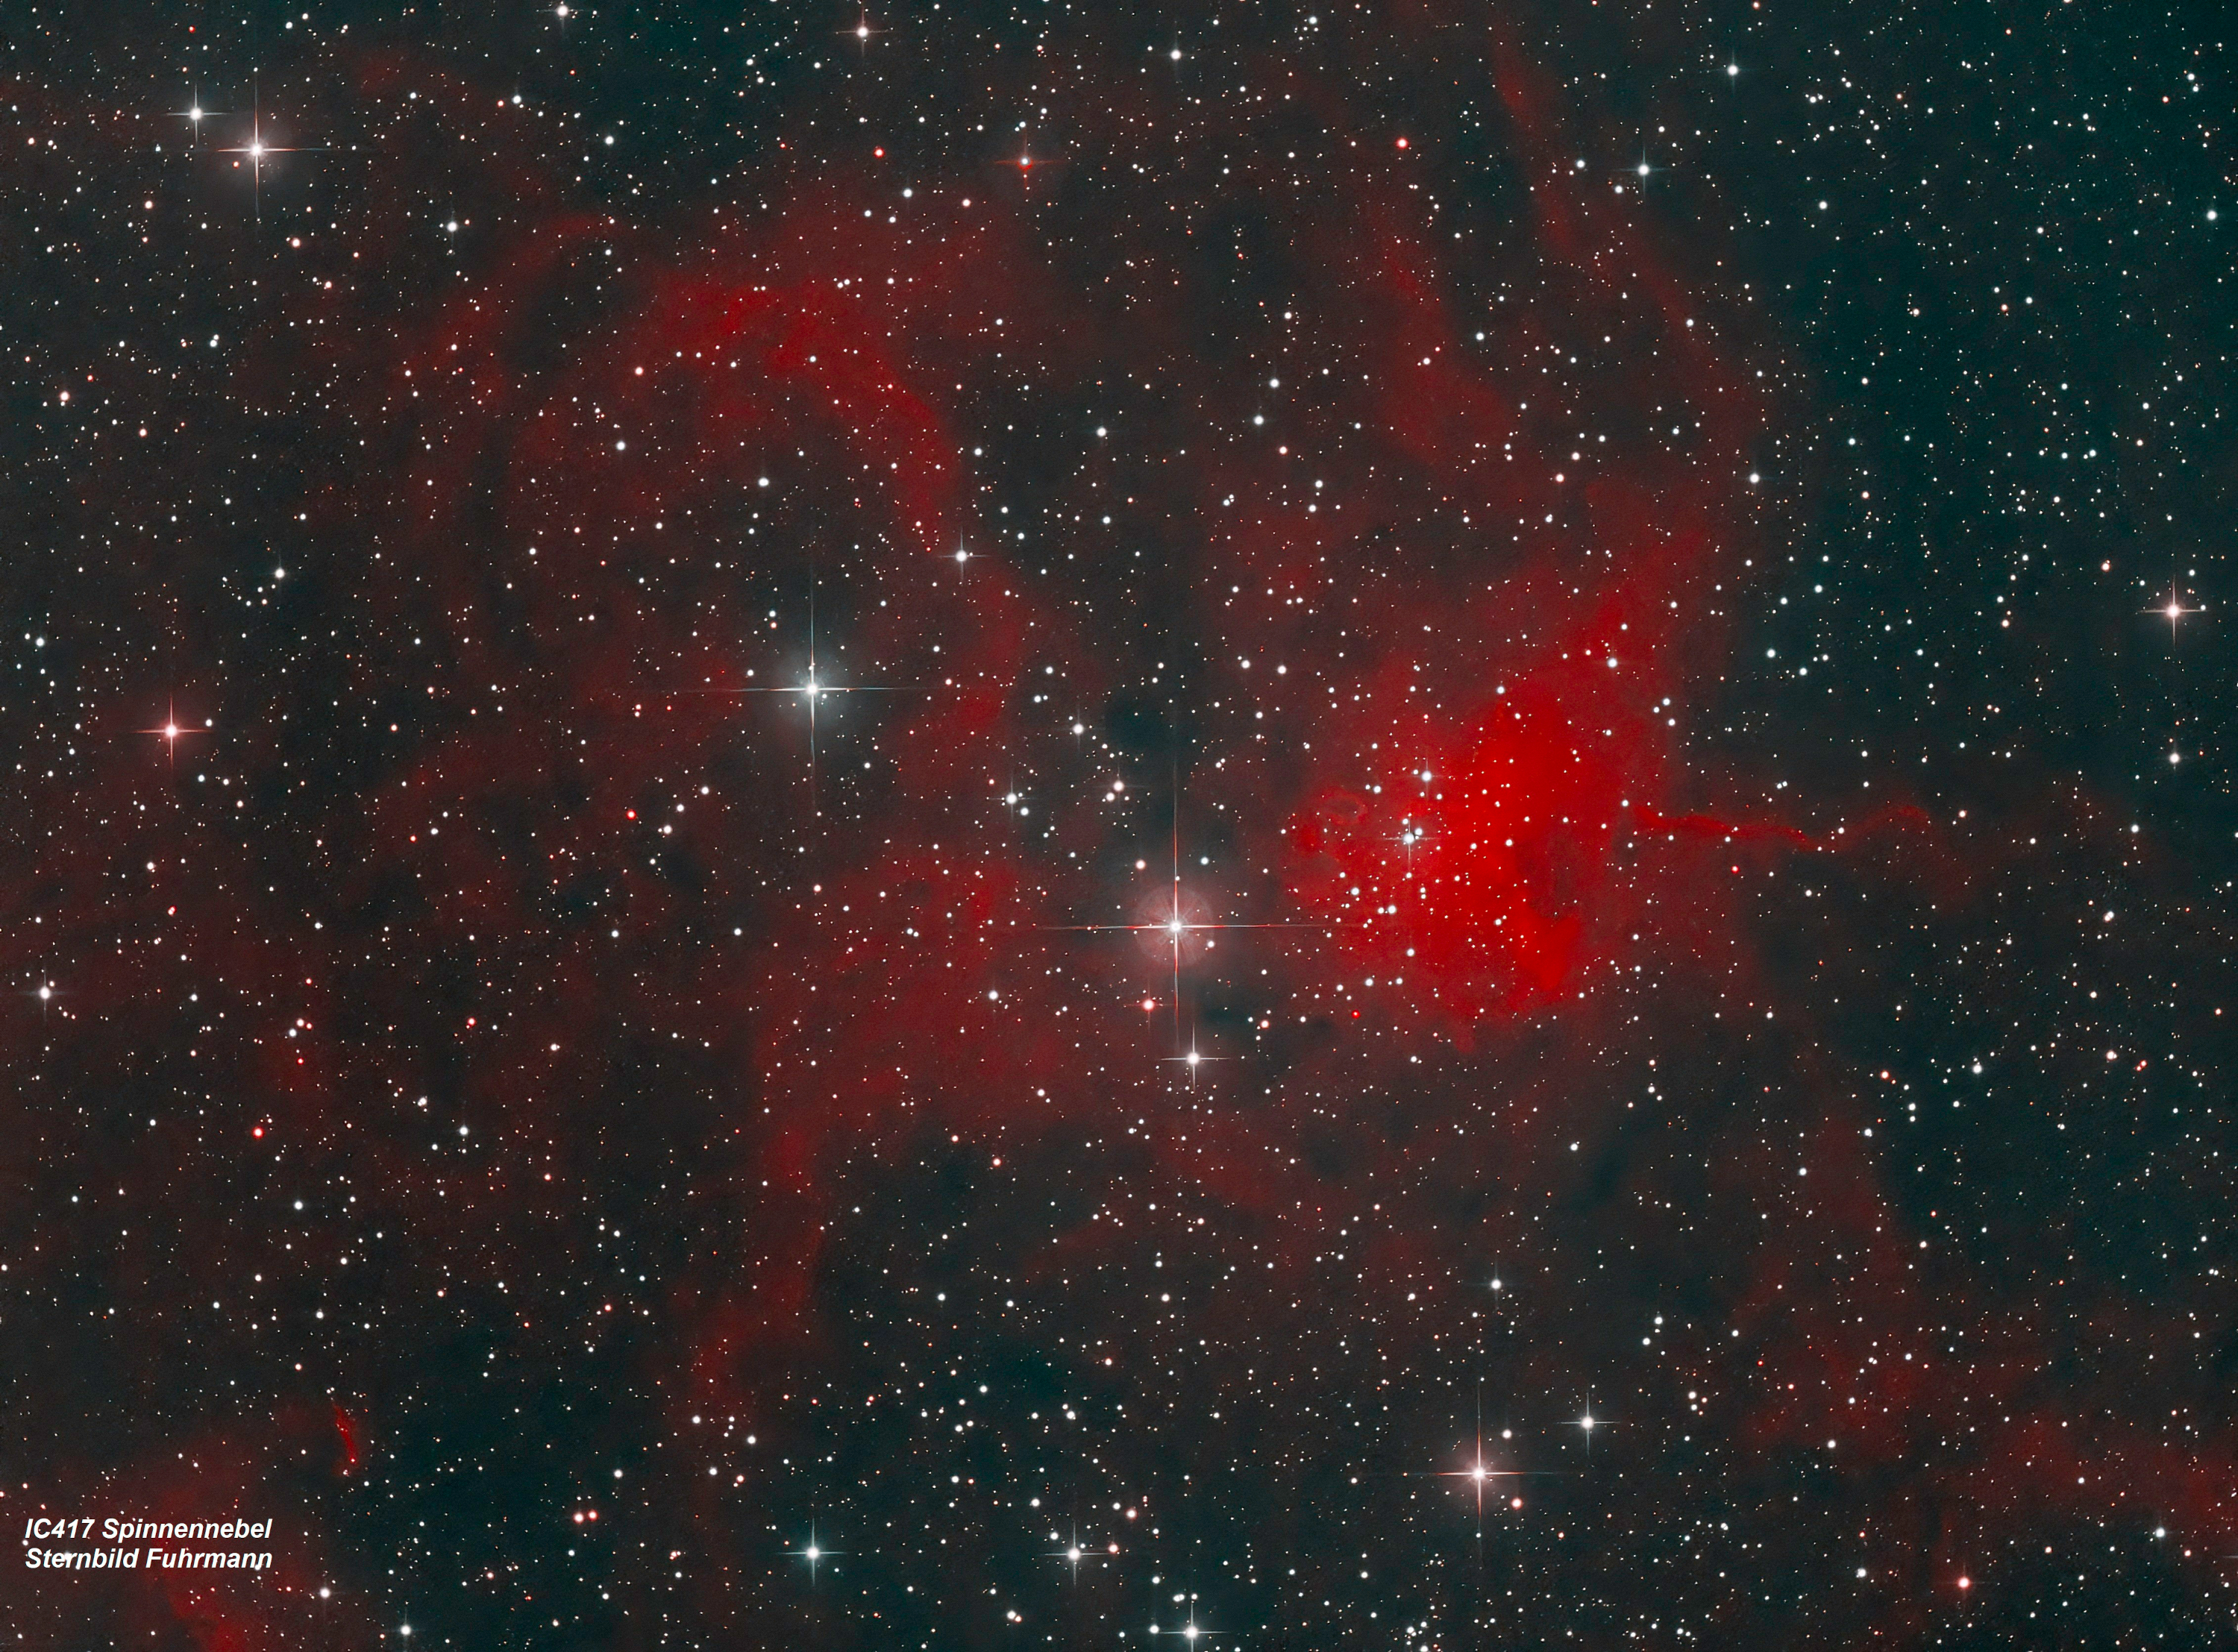 IC417 Spinnennebel